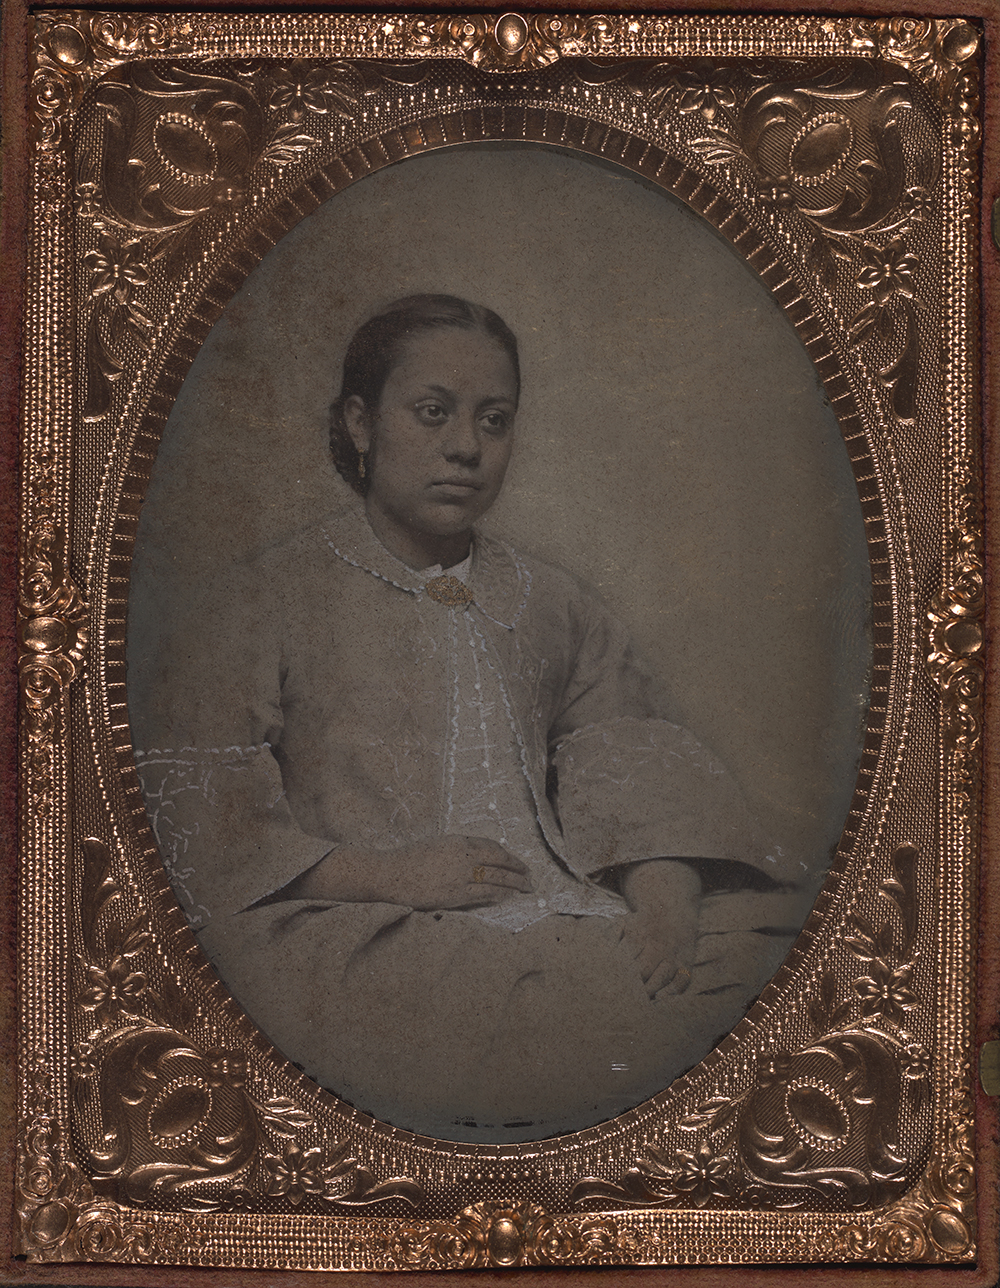 Photographic portrait of a biracial woman seated with hands resting in her lap